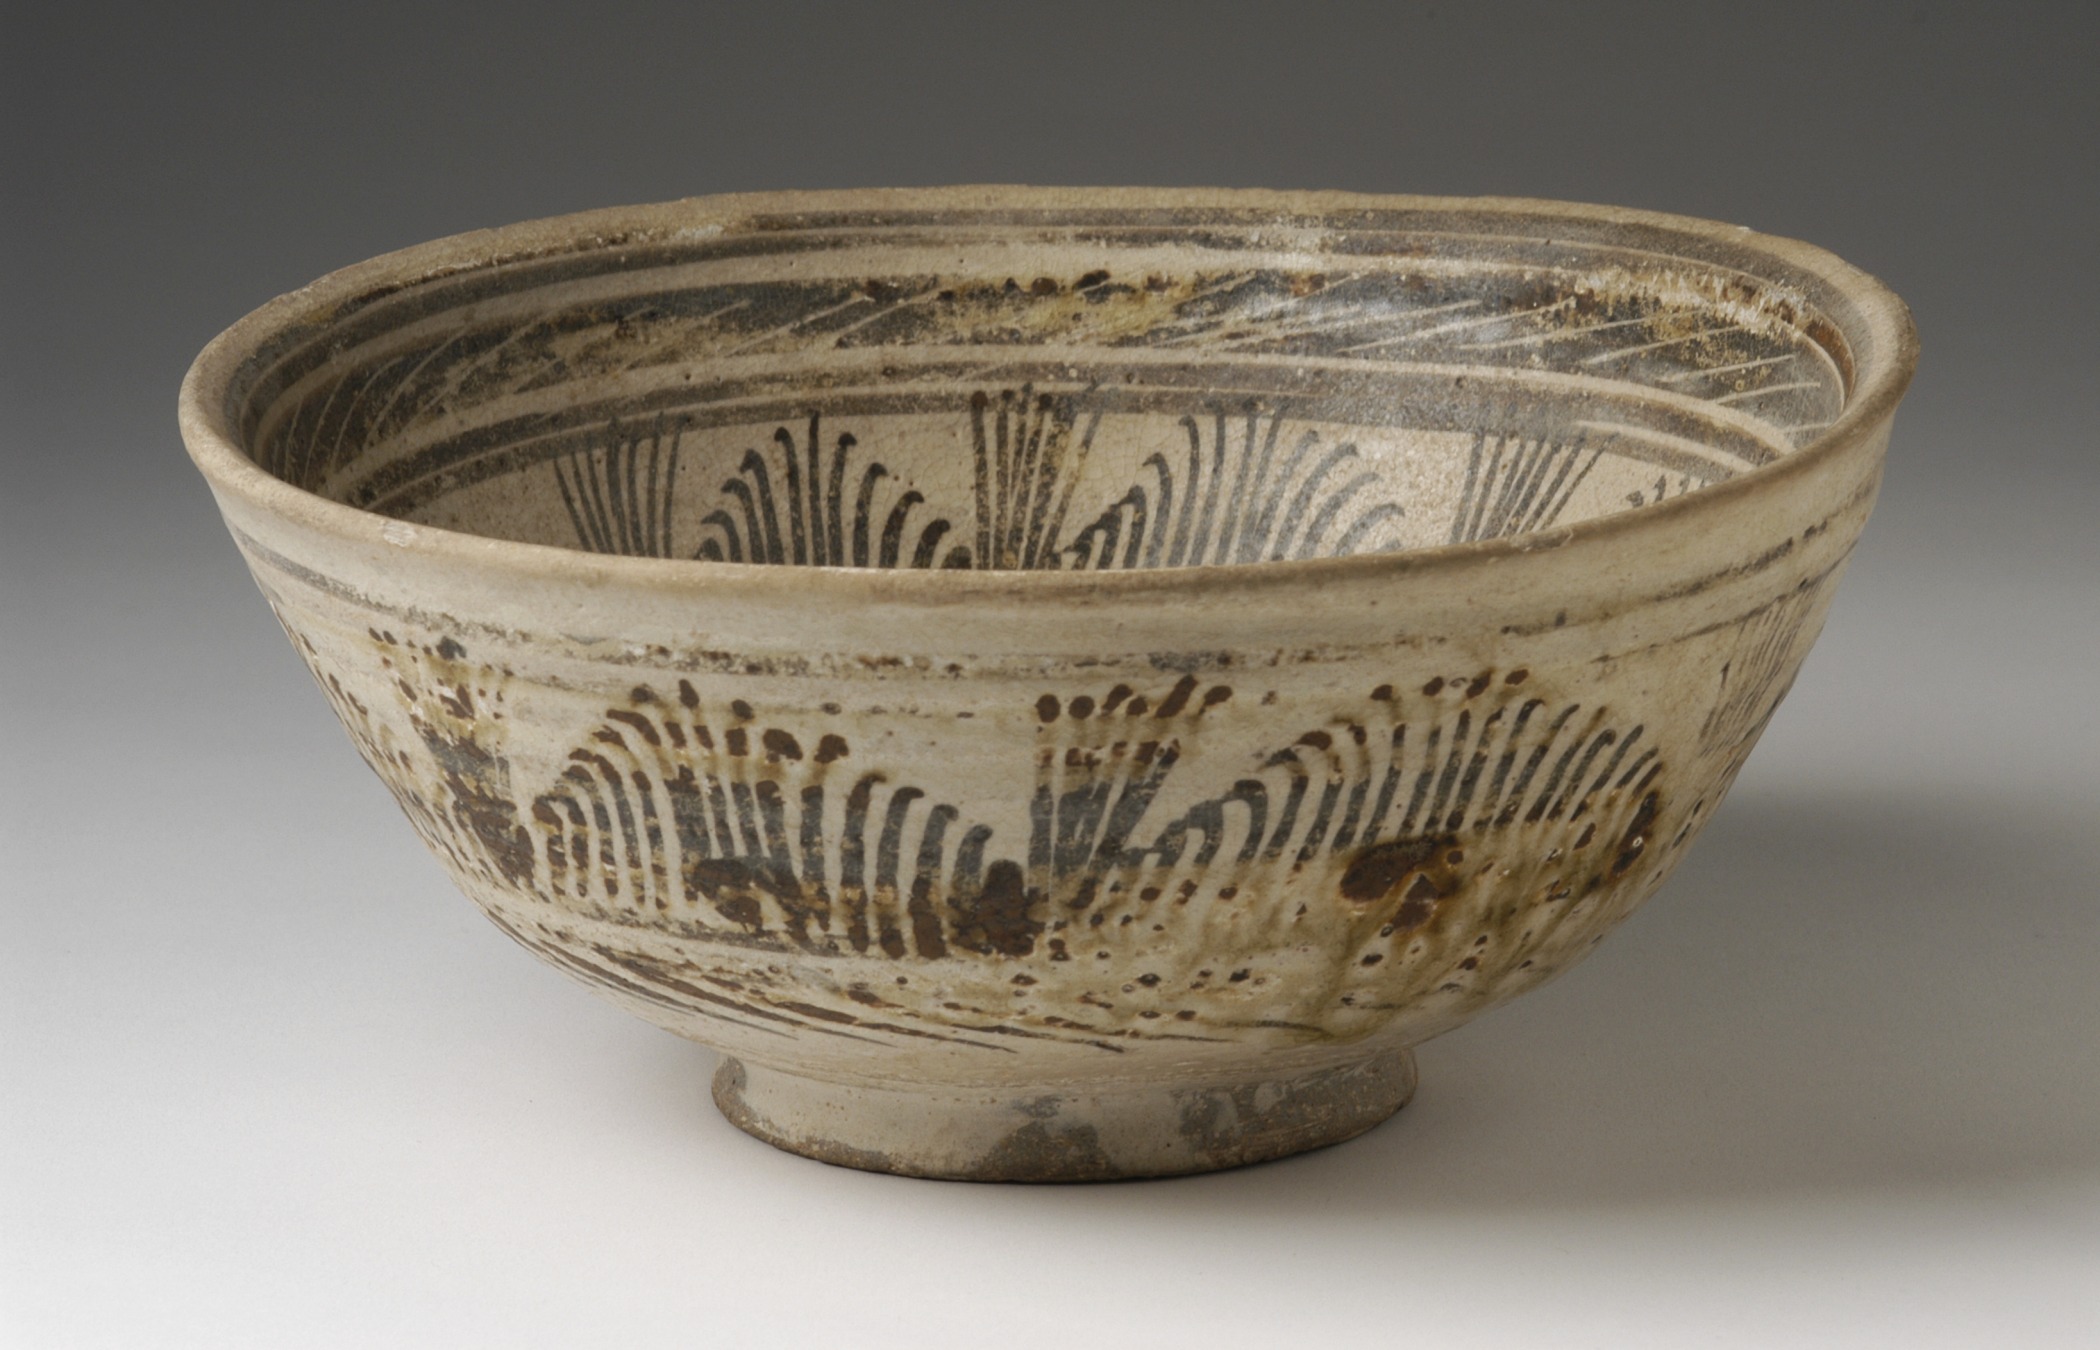 a bowl is shown with a white surface